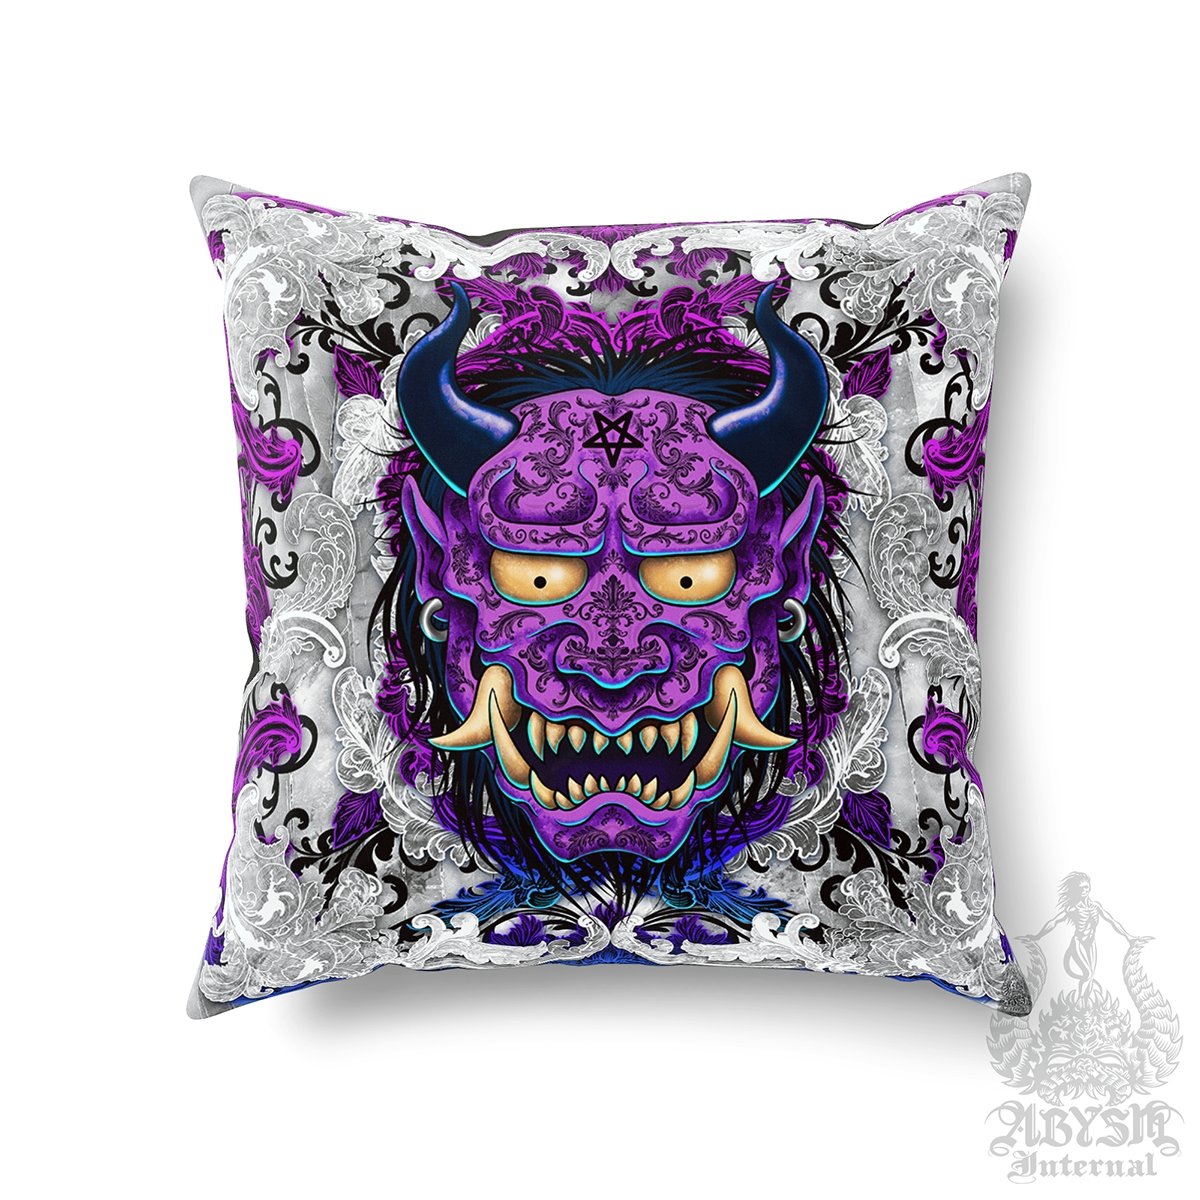 Japanese Demon Throw Pillow, Decorative Accent Cushion, Anime and Gamer Room Decor, Alternative Home - Pastel and White Goth Oni or Hannya - Abysm Internal